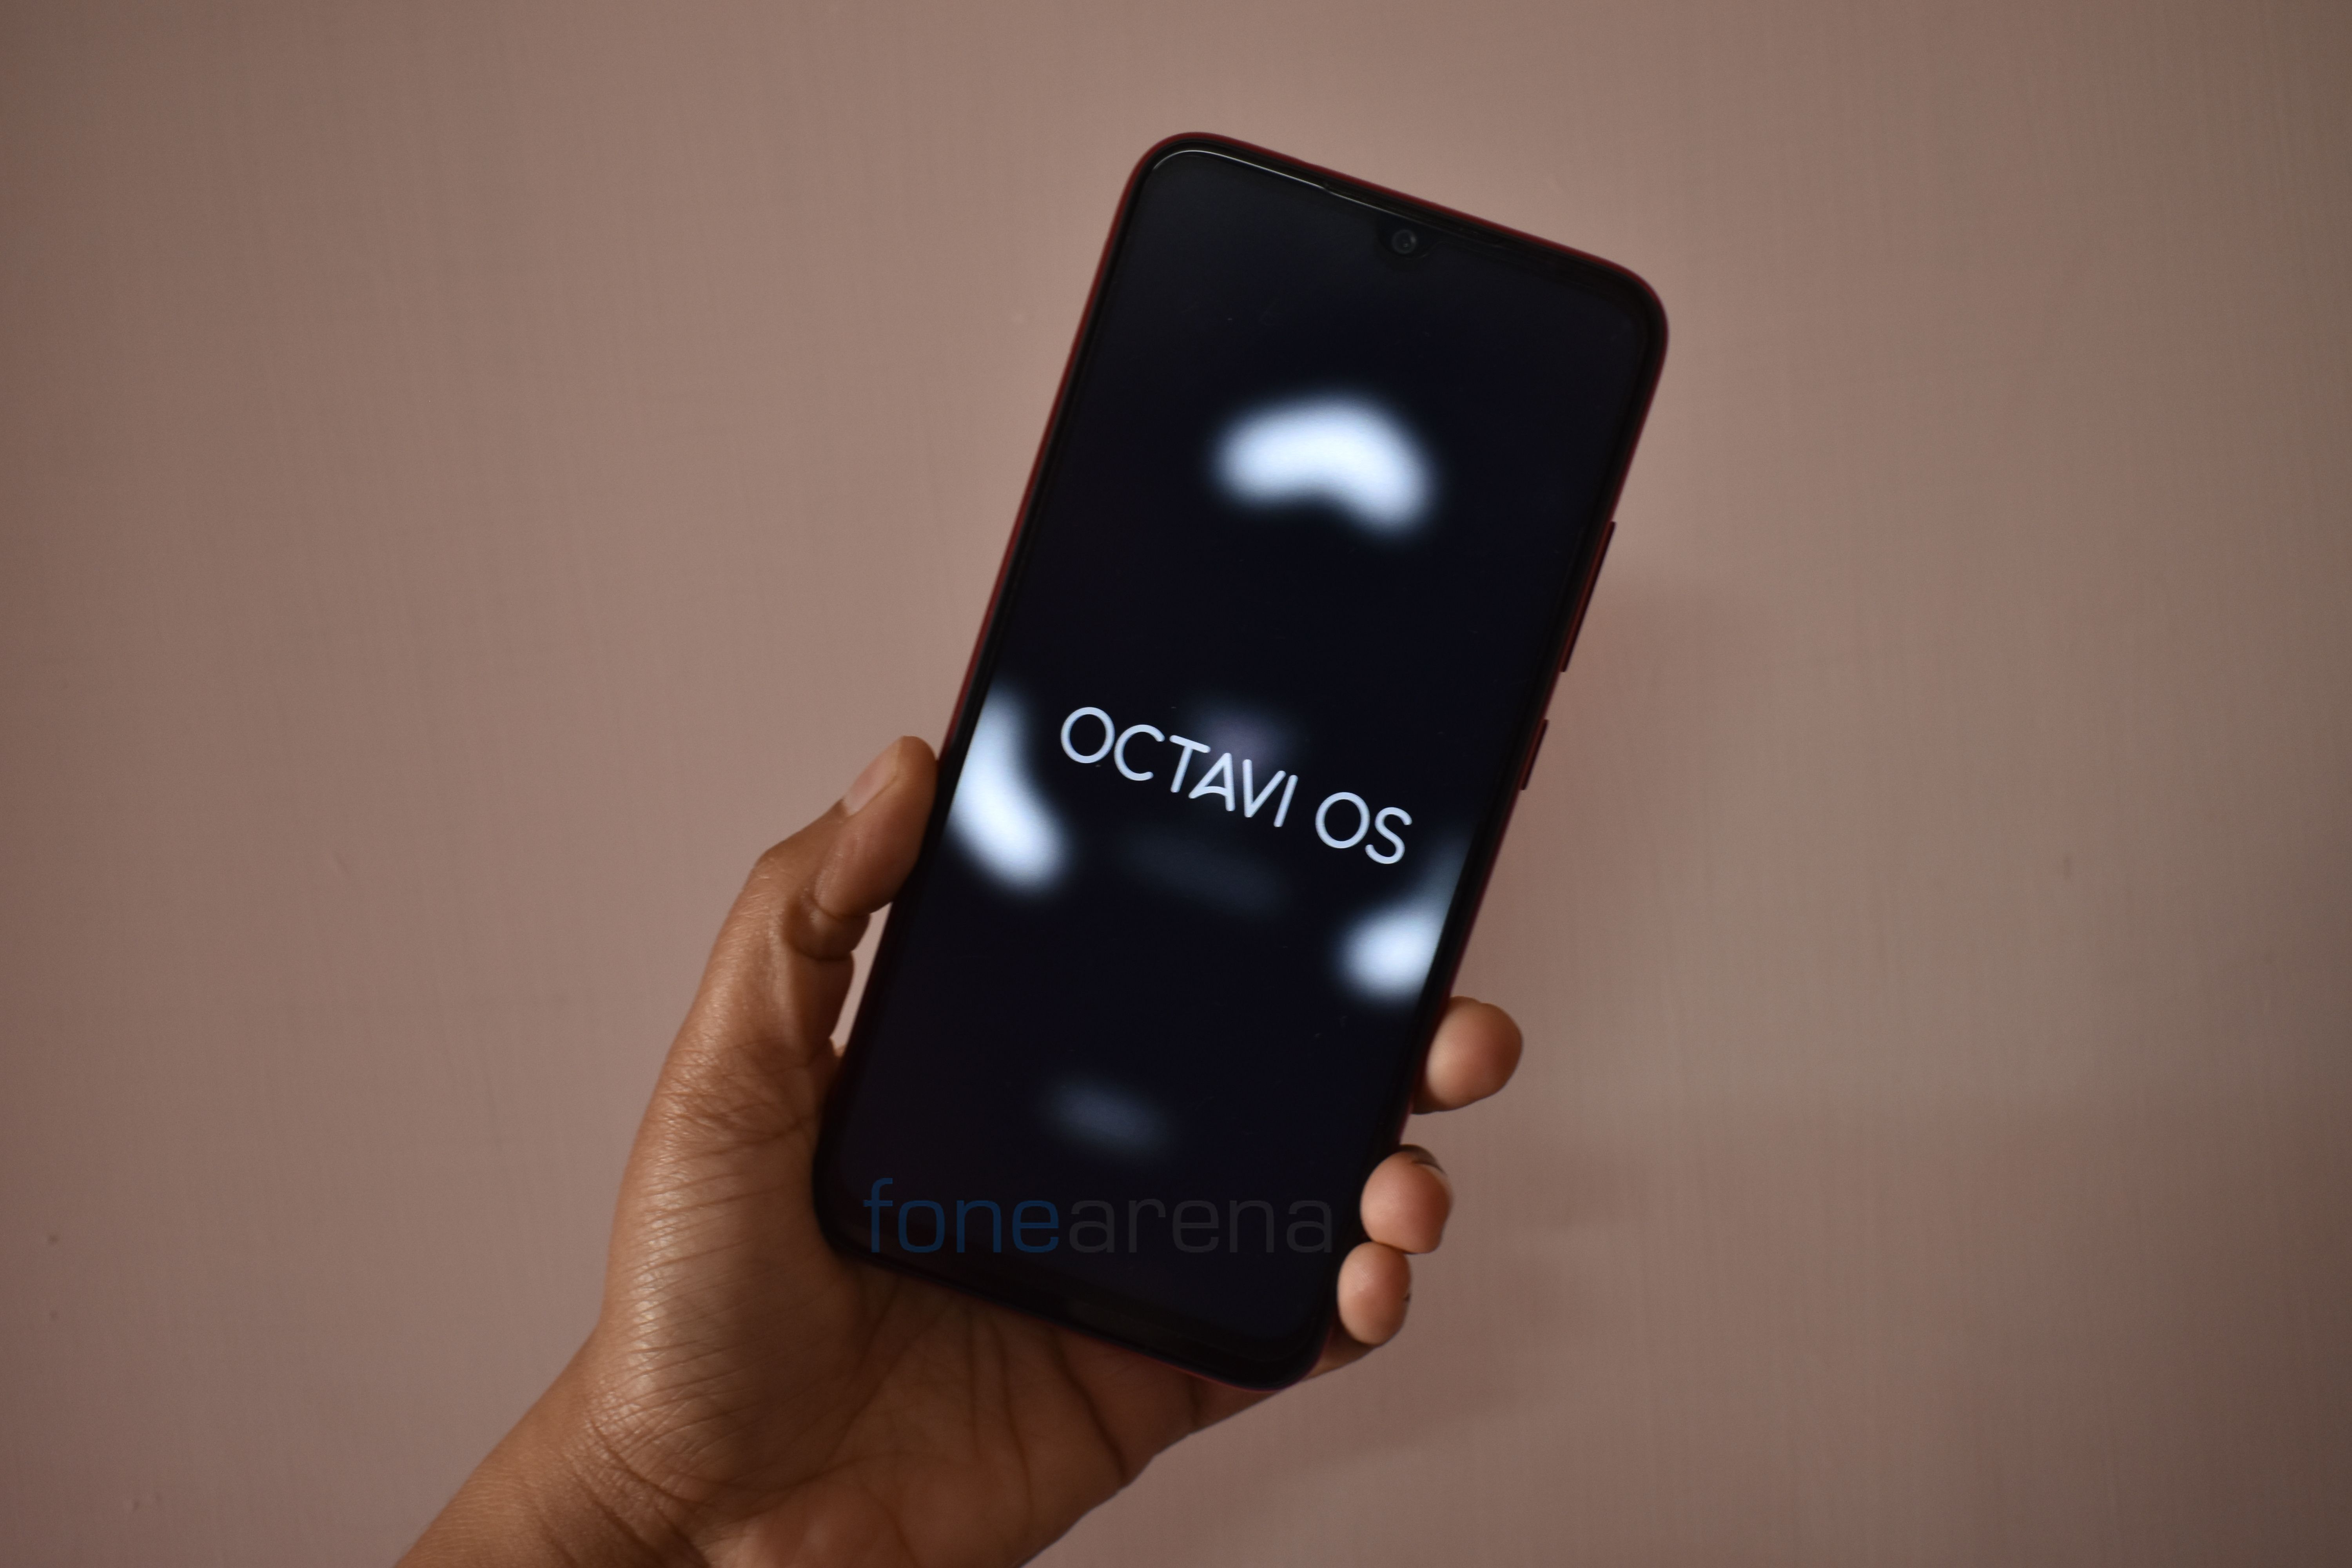 Get Android 11 on Redmi Note 7 Pro with OctaviOS